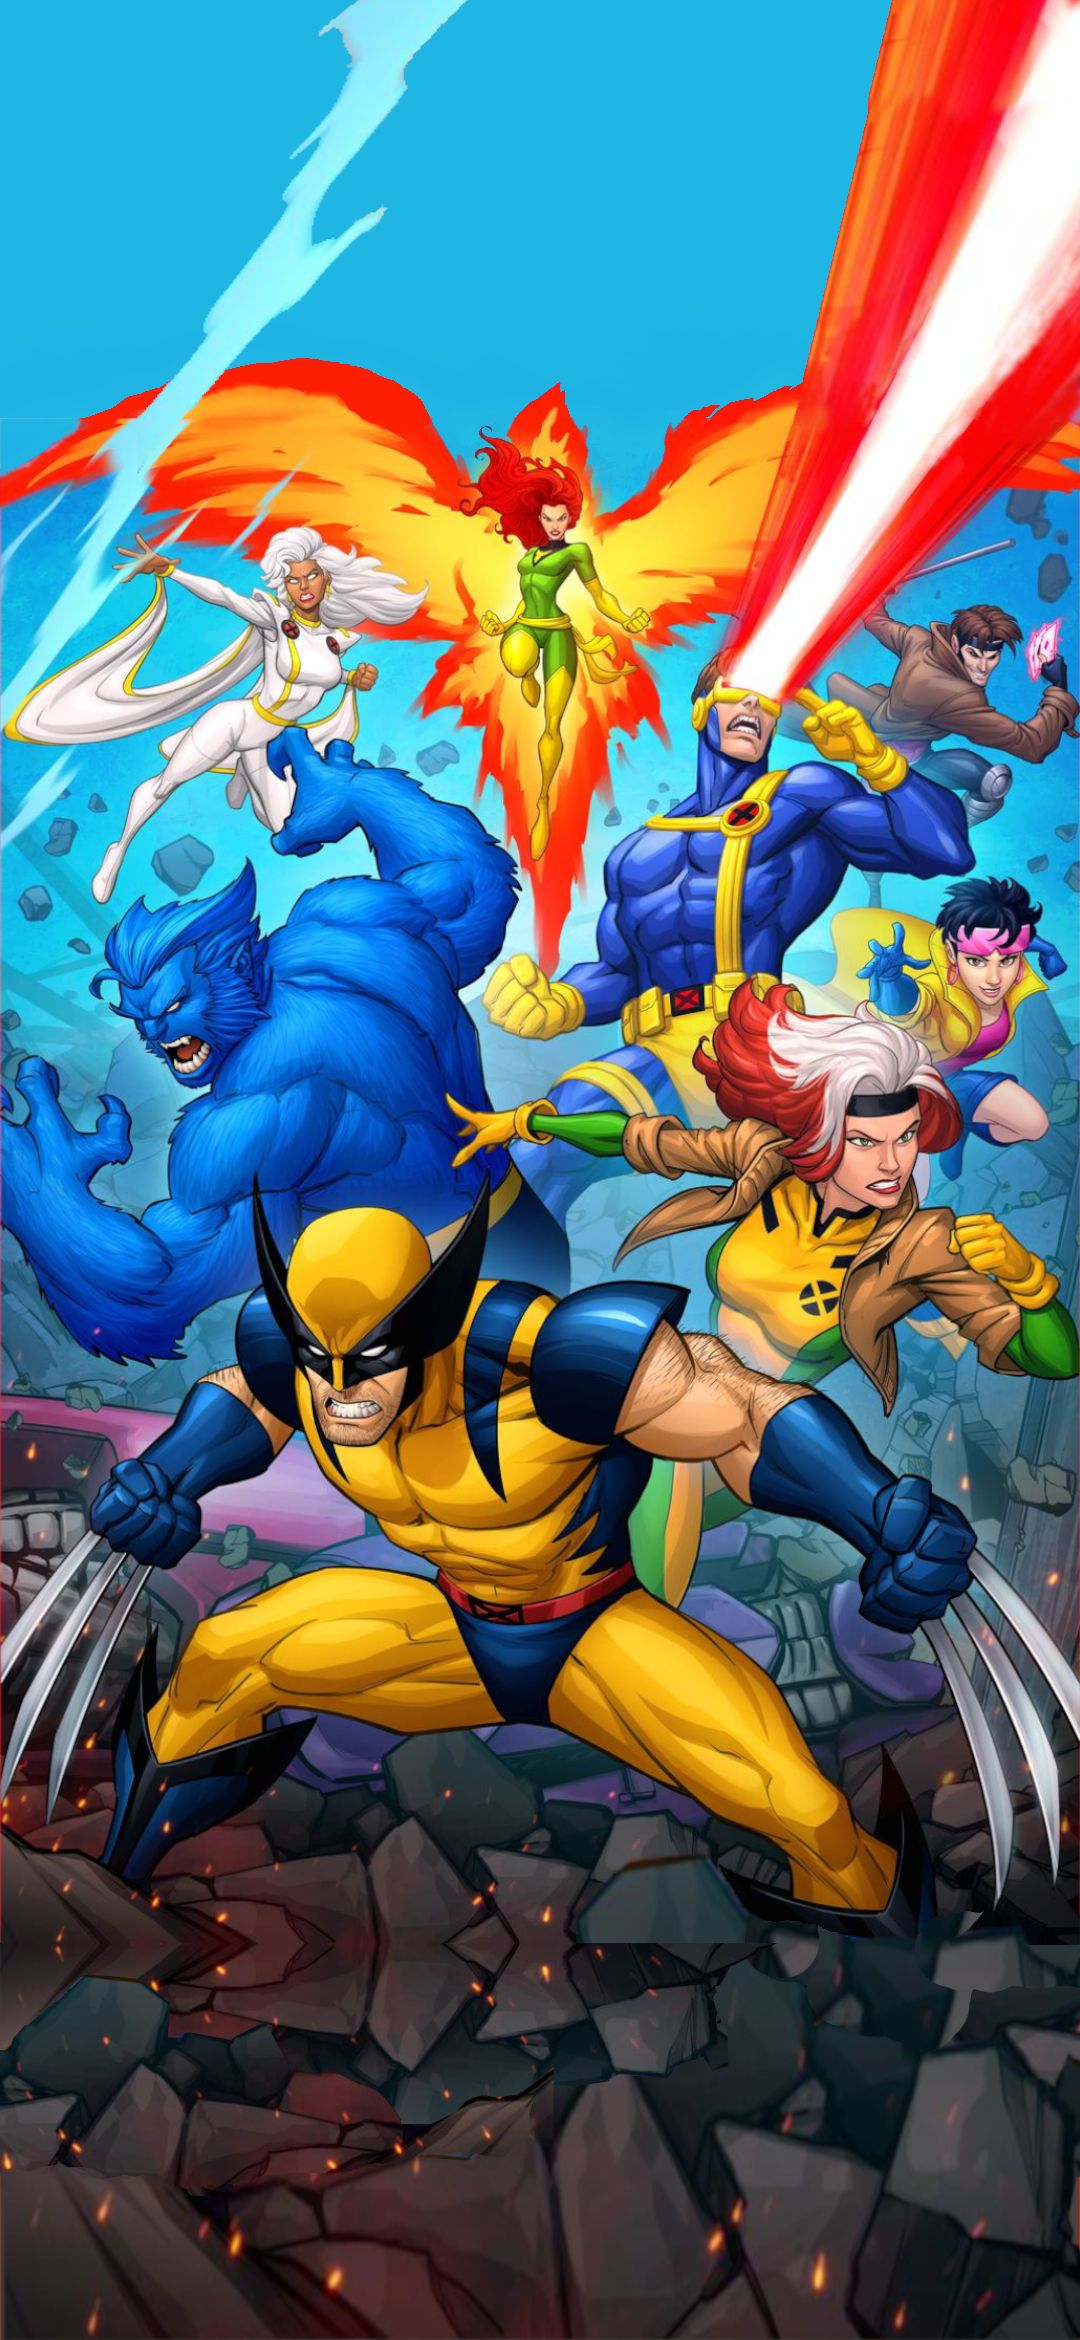 1080x2340 x-men wallpaper android | Android wallpaper, X-men wallpaper, Wallpaper